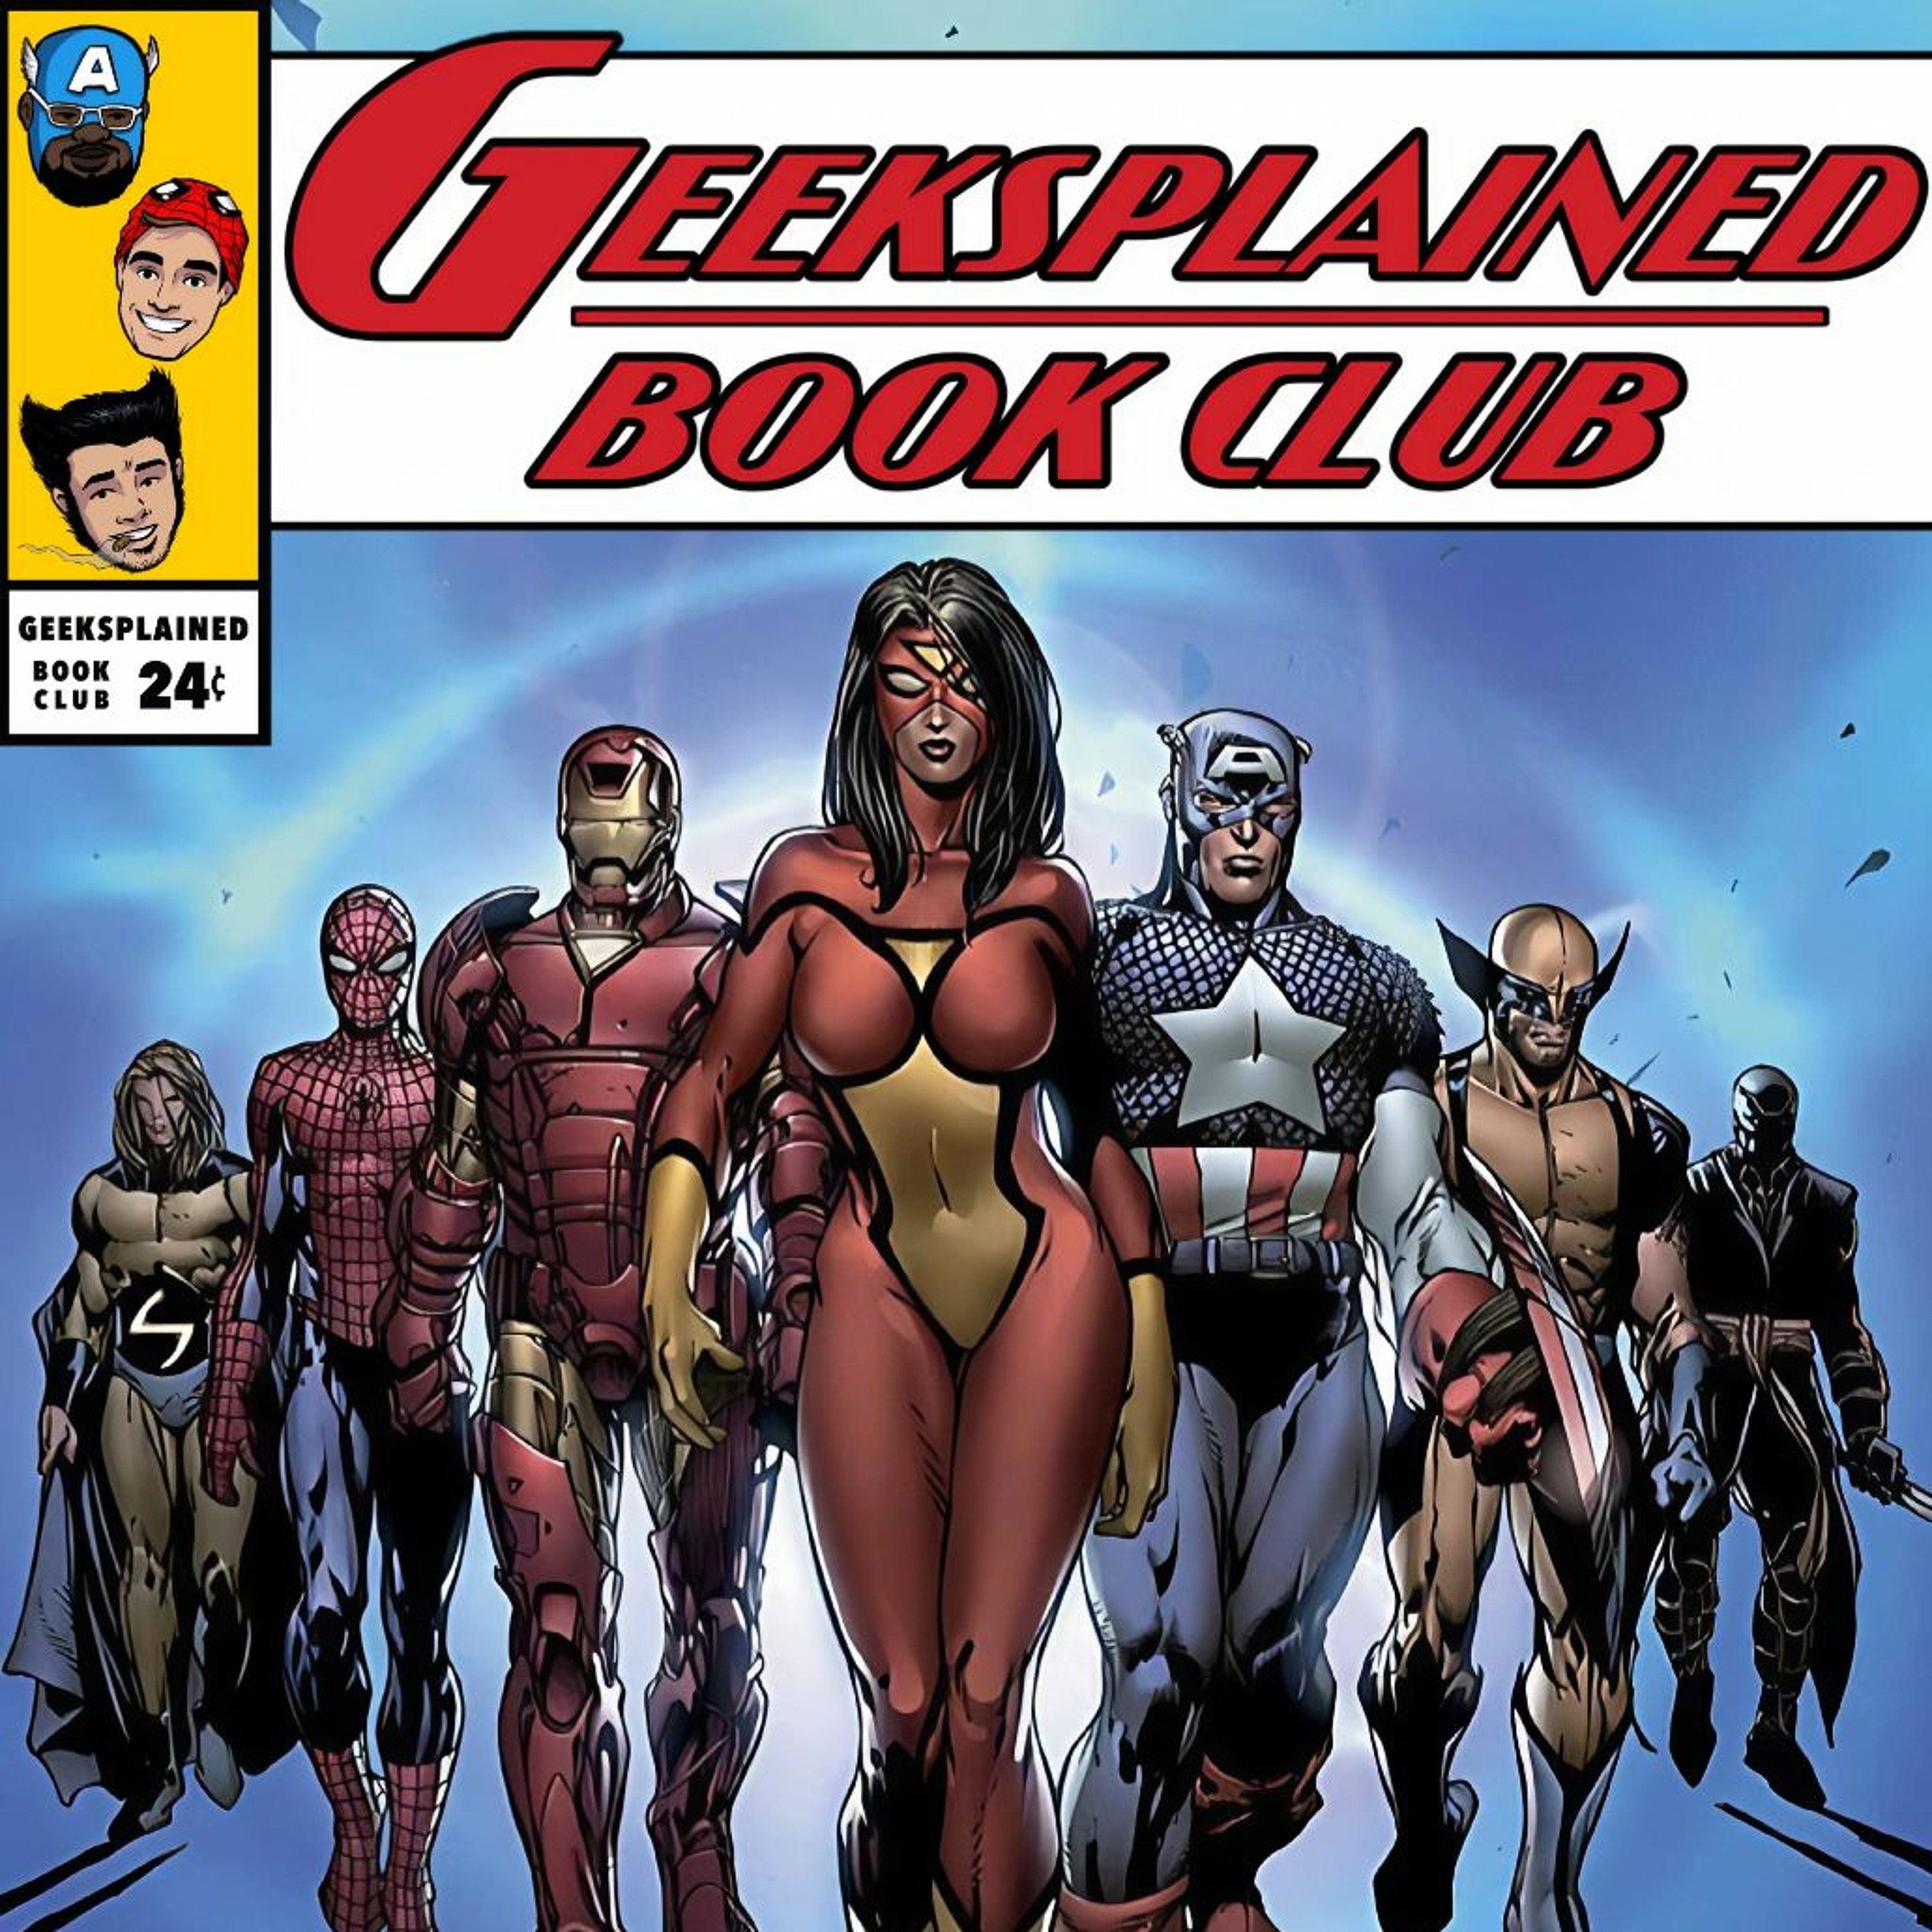 Book Club: Bendis' New Avengers Part 13 (Mighty Avengers #7-11)